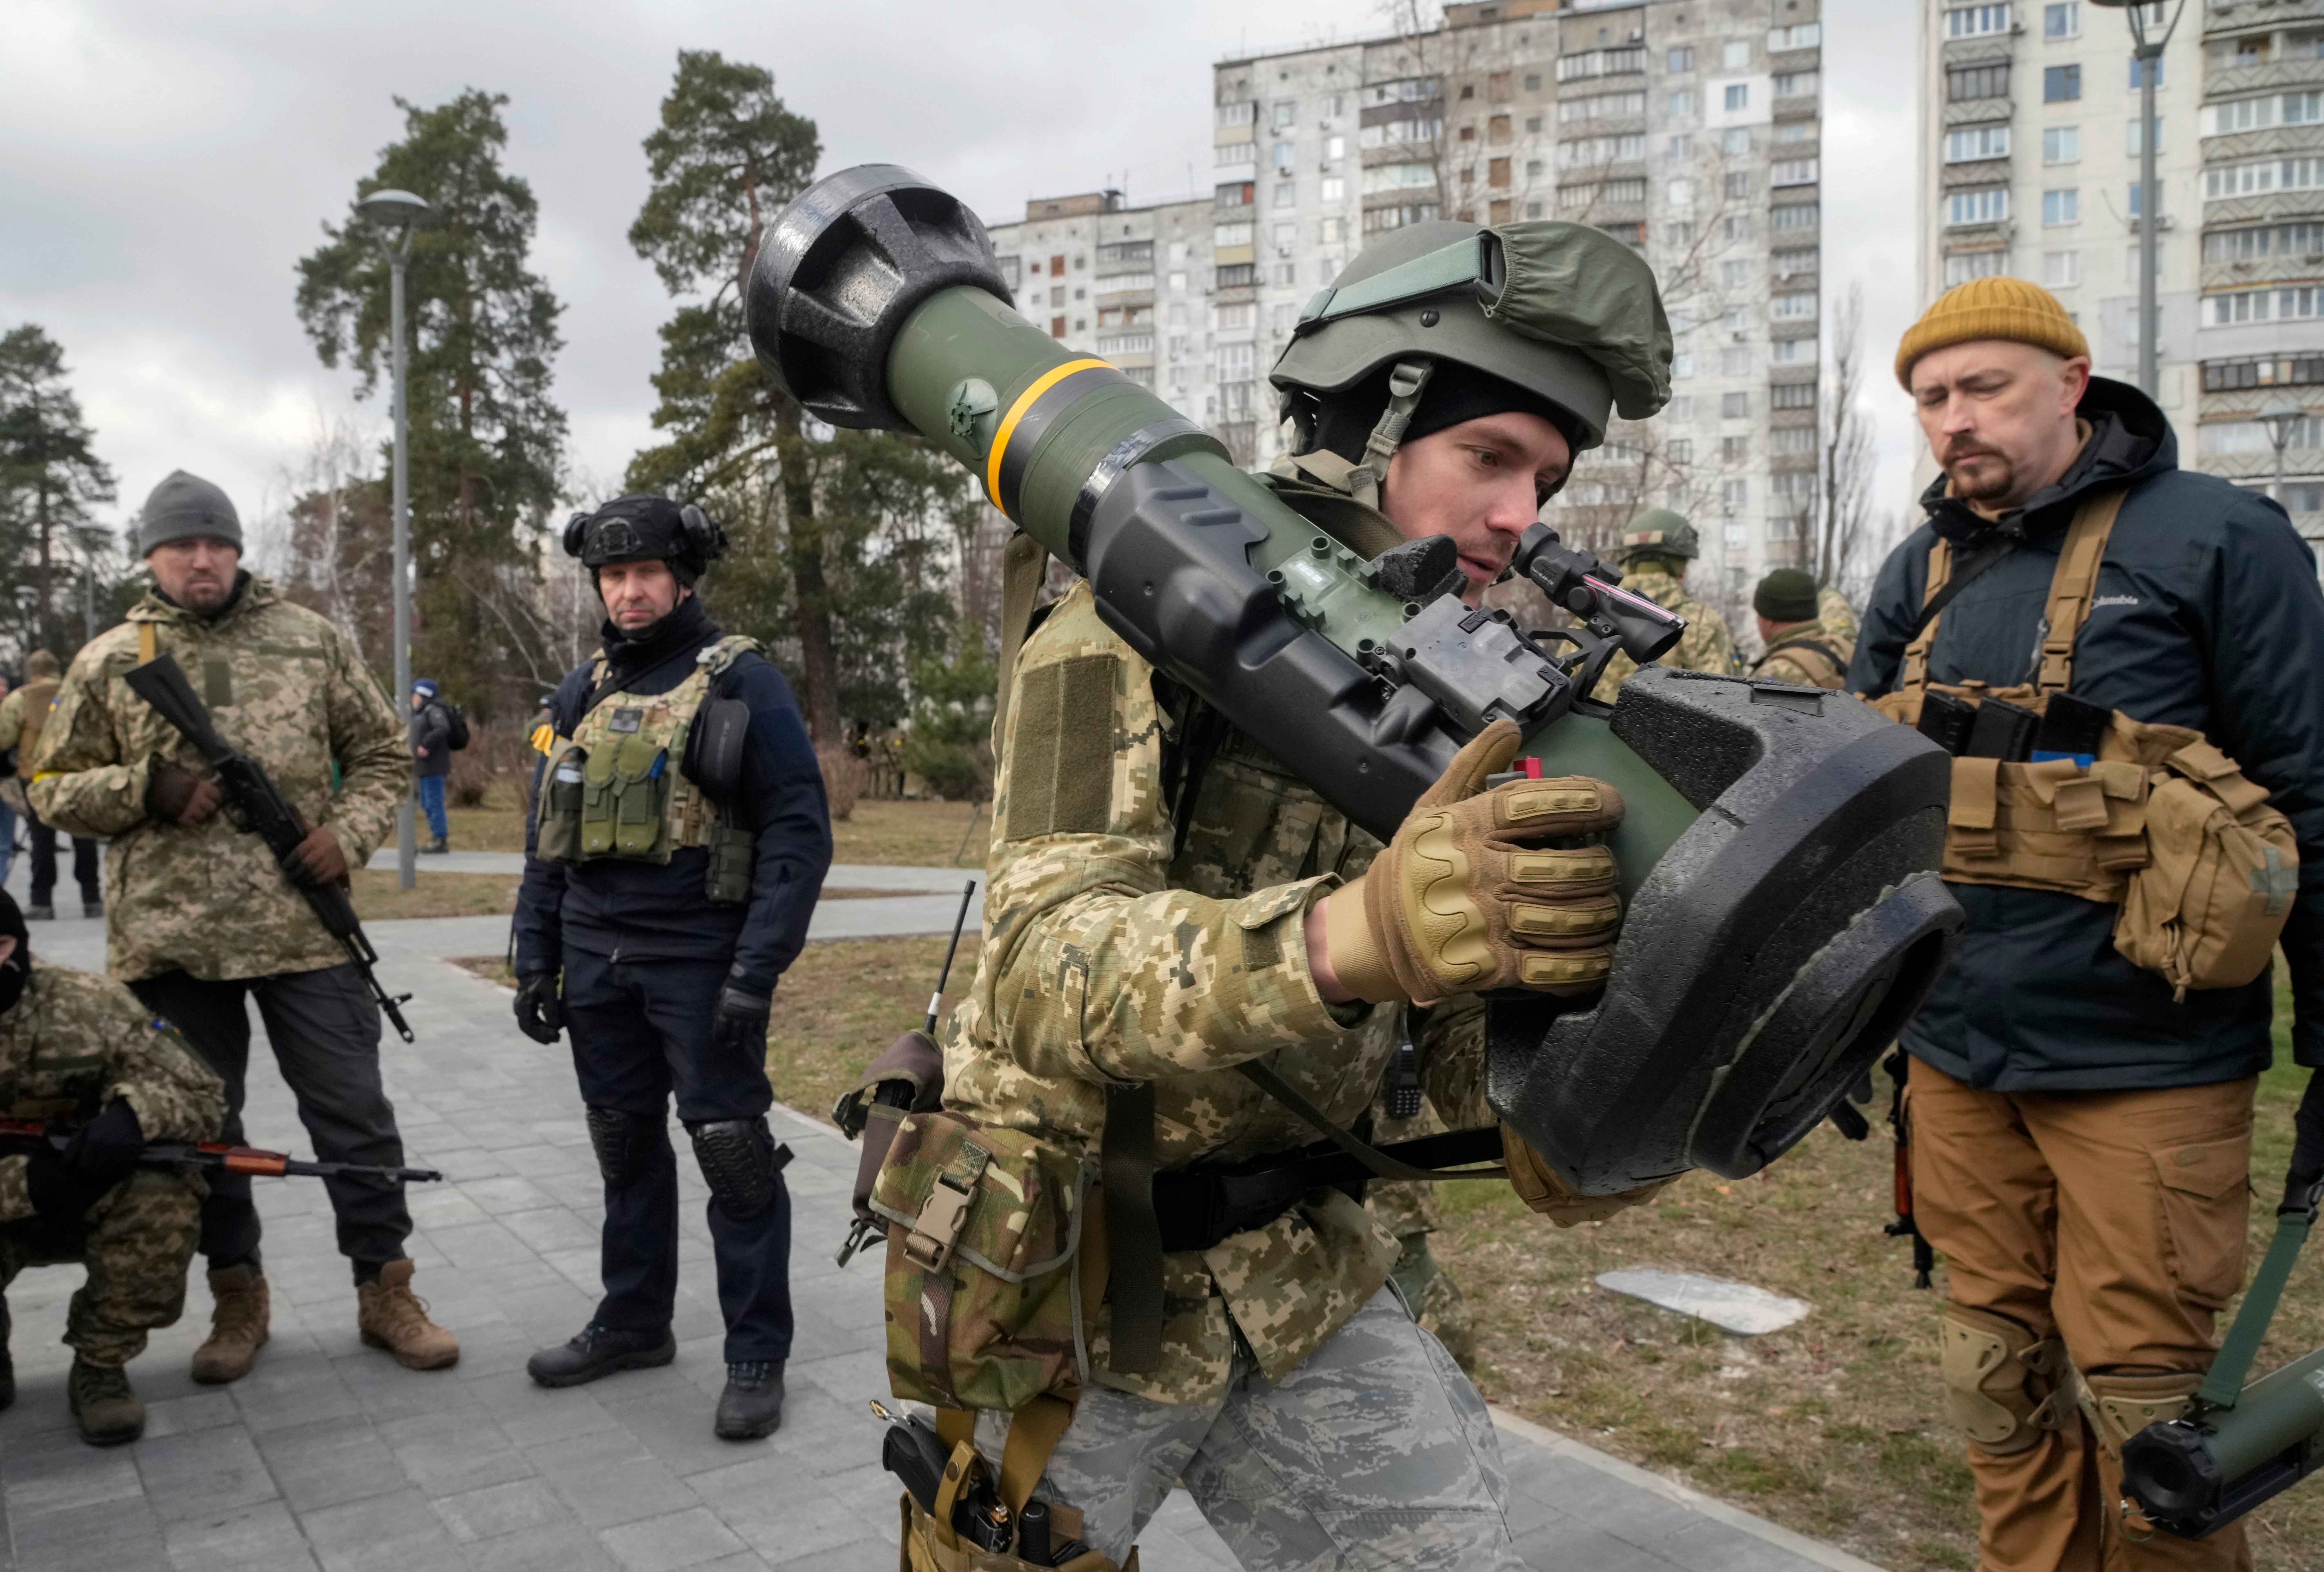 A Ukrainian Territorial Defence Forces member holds an NLAW anti-tank weapon in the outskirts of Kyiv during the early days of the conflict in March